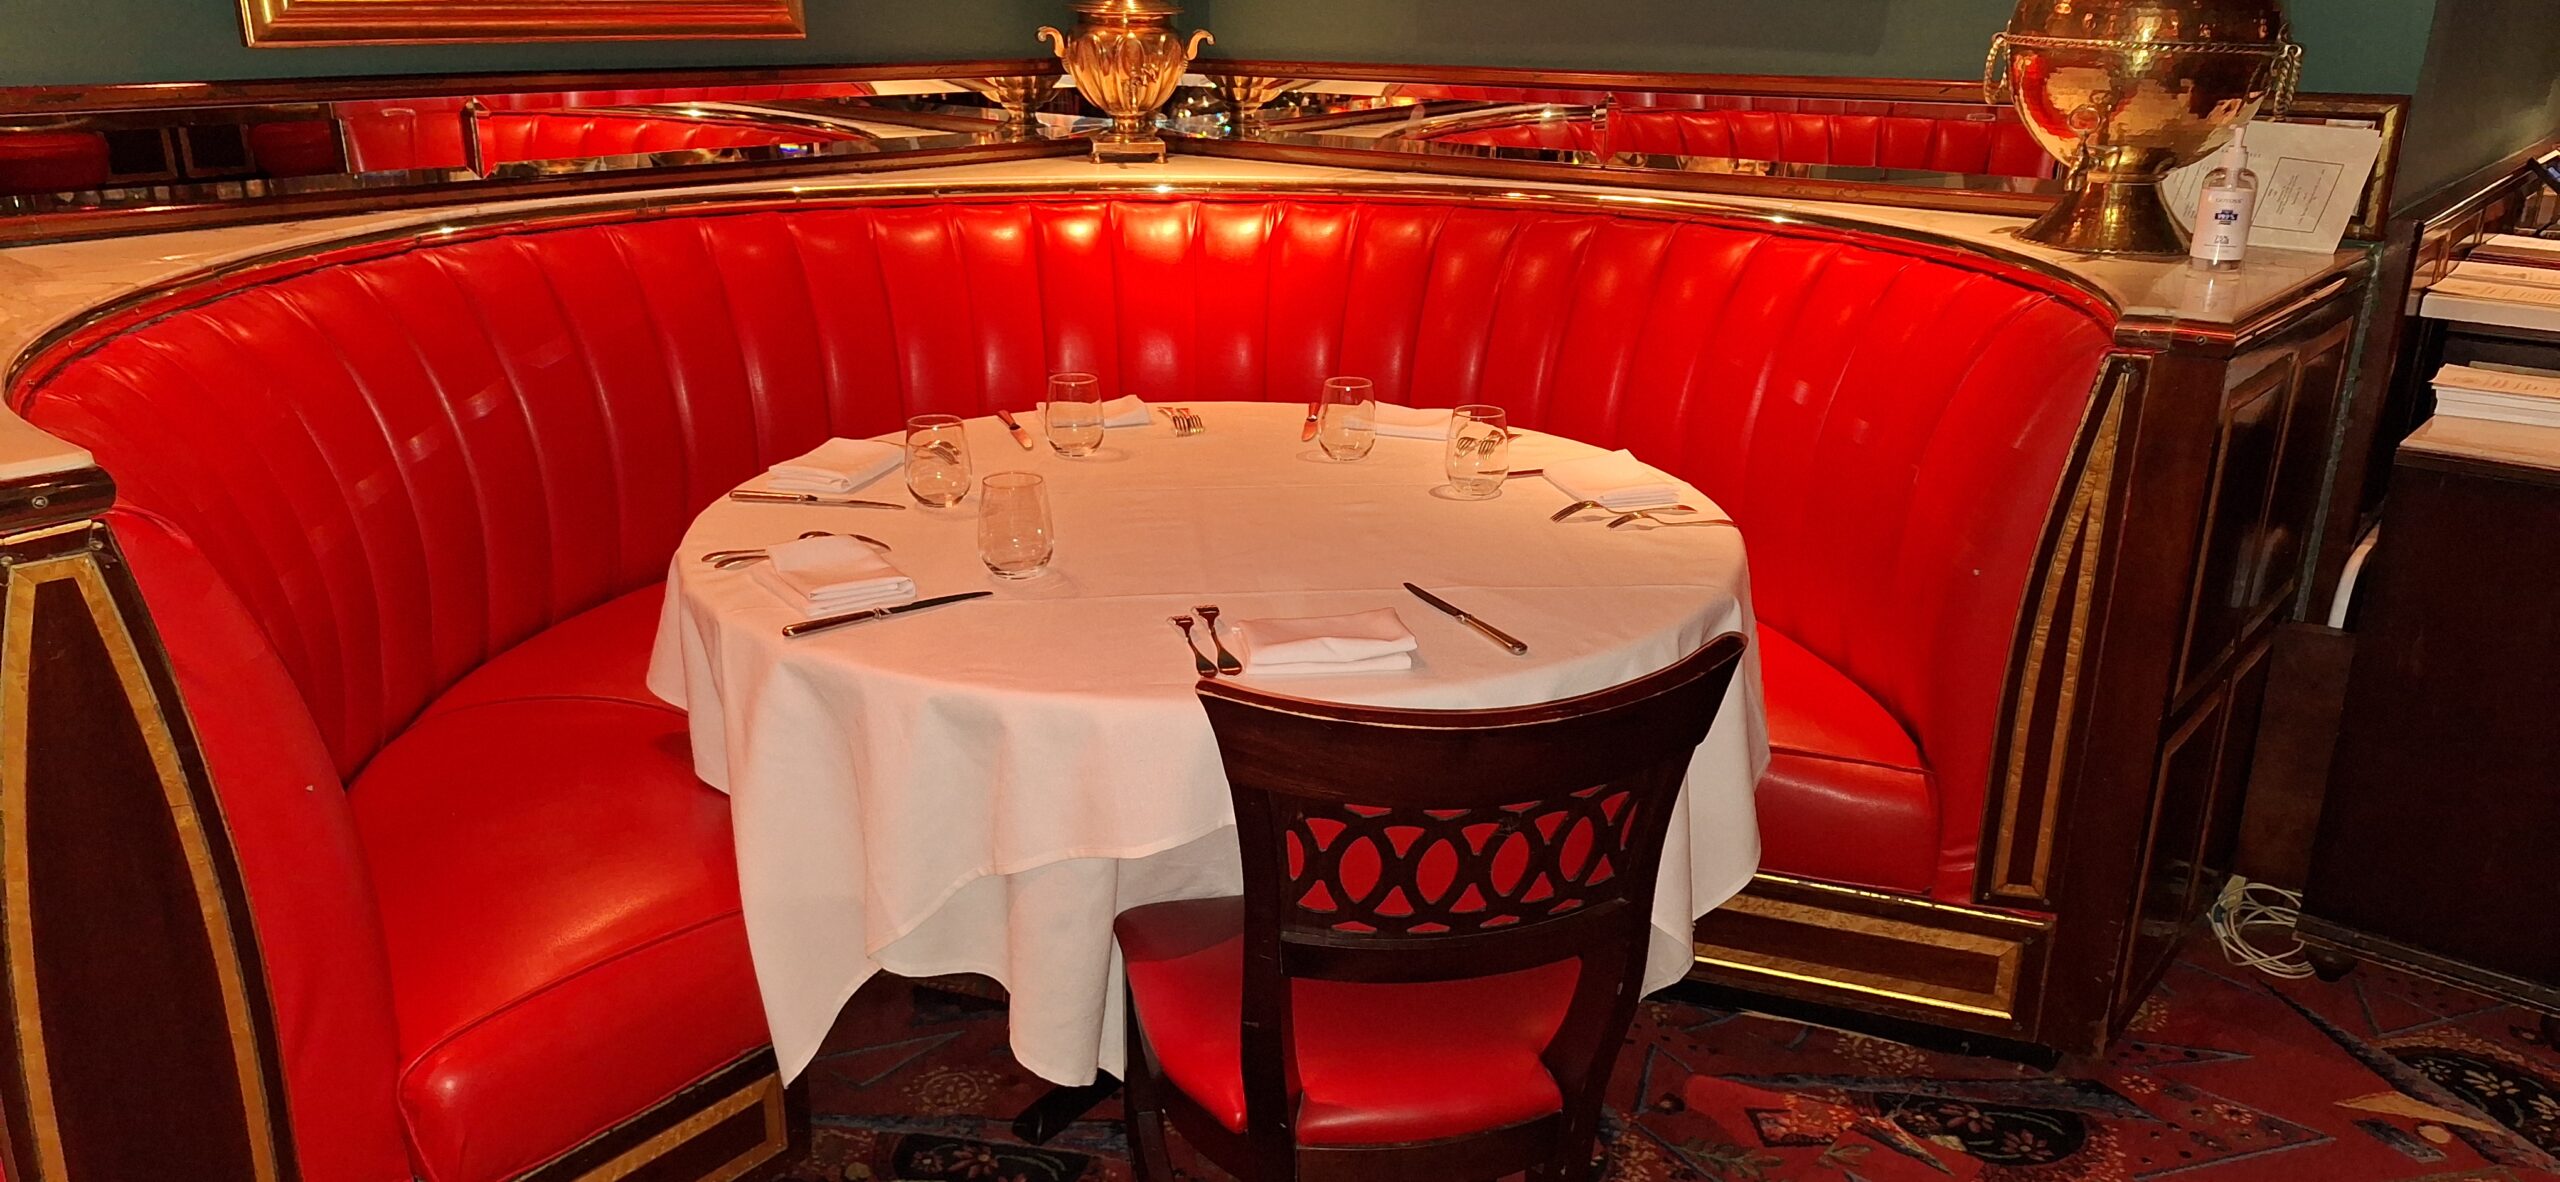 a table with a white tablecloth and red booth seating